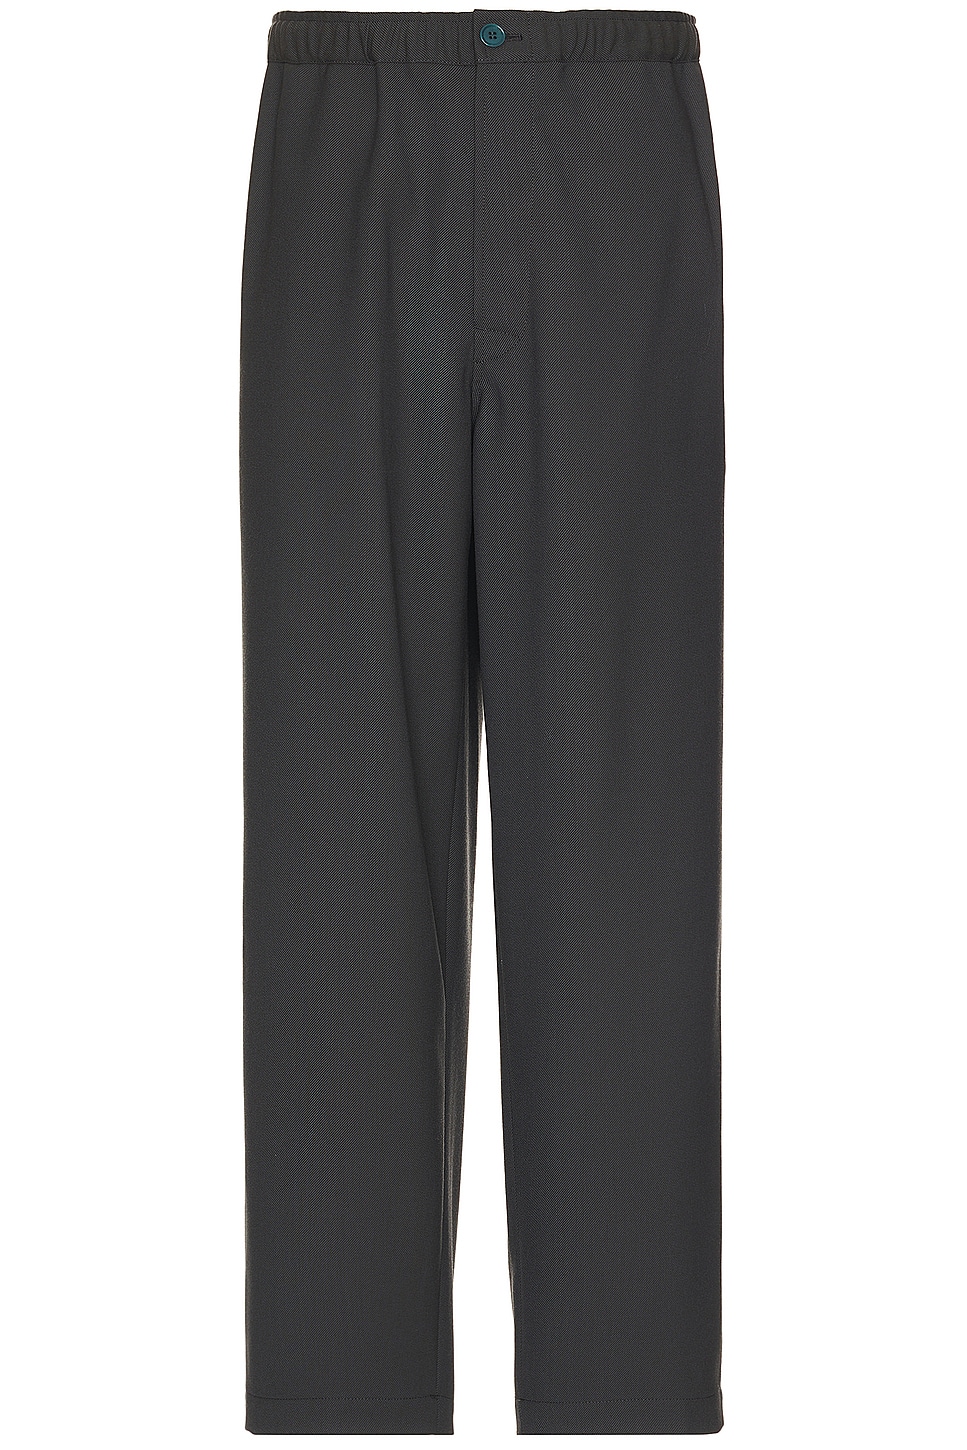 Image 1 of Undercover Pants in Gray Khaki